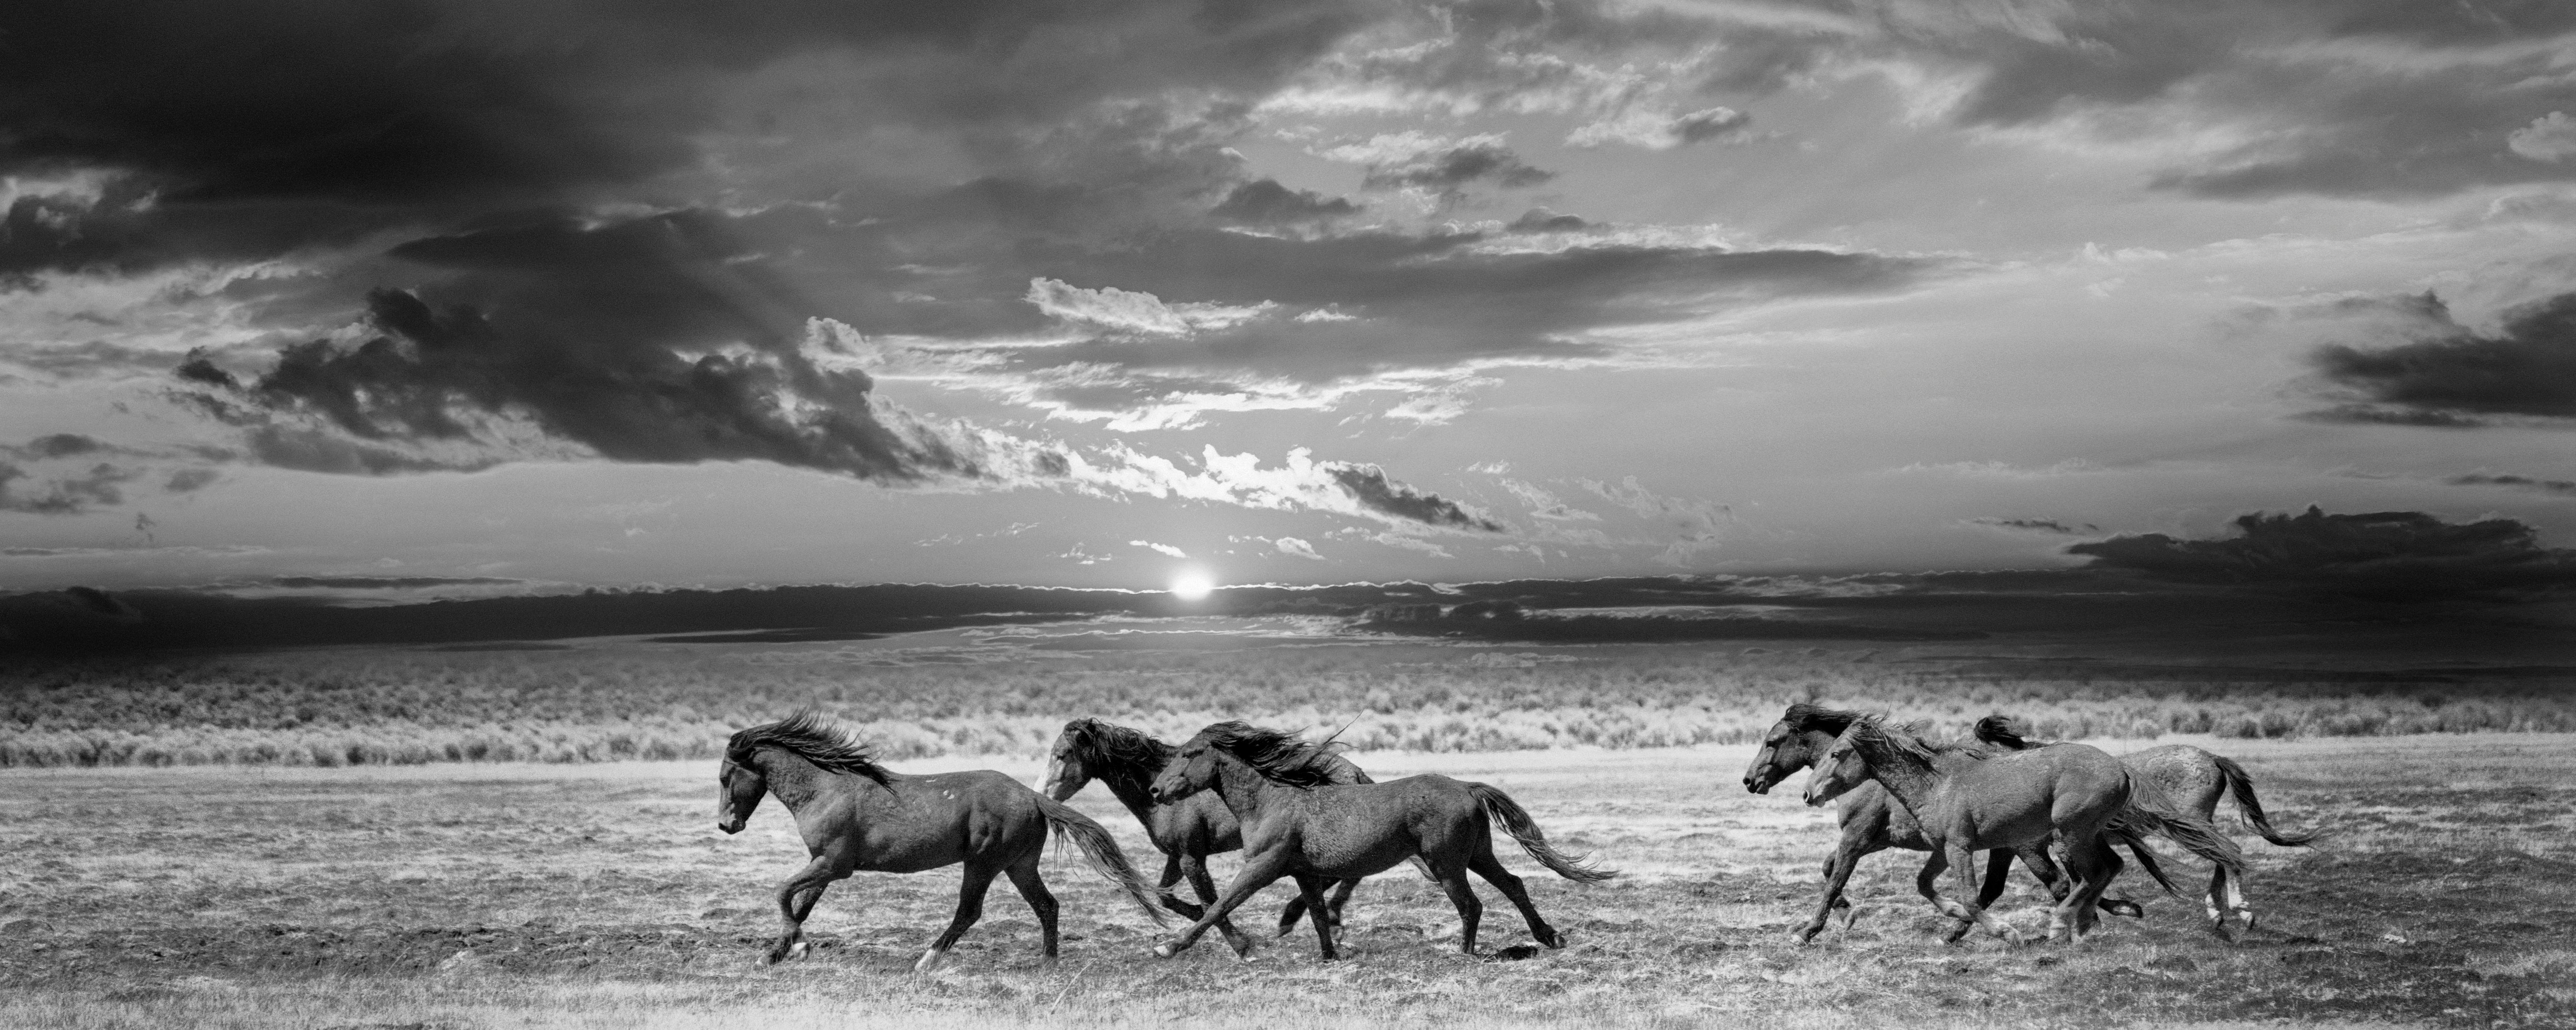 Shane Russeck Black and White Photograph - Chasing the Light  48x120 B&W Photography Wild Horses Mustangs Photograph